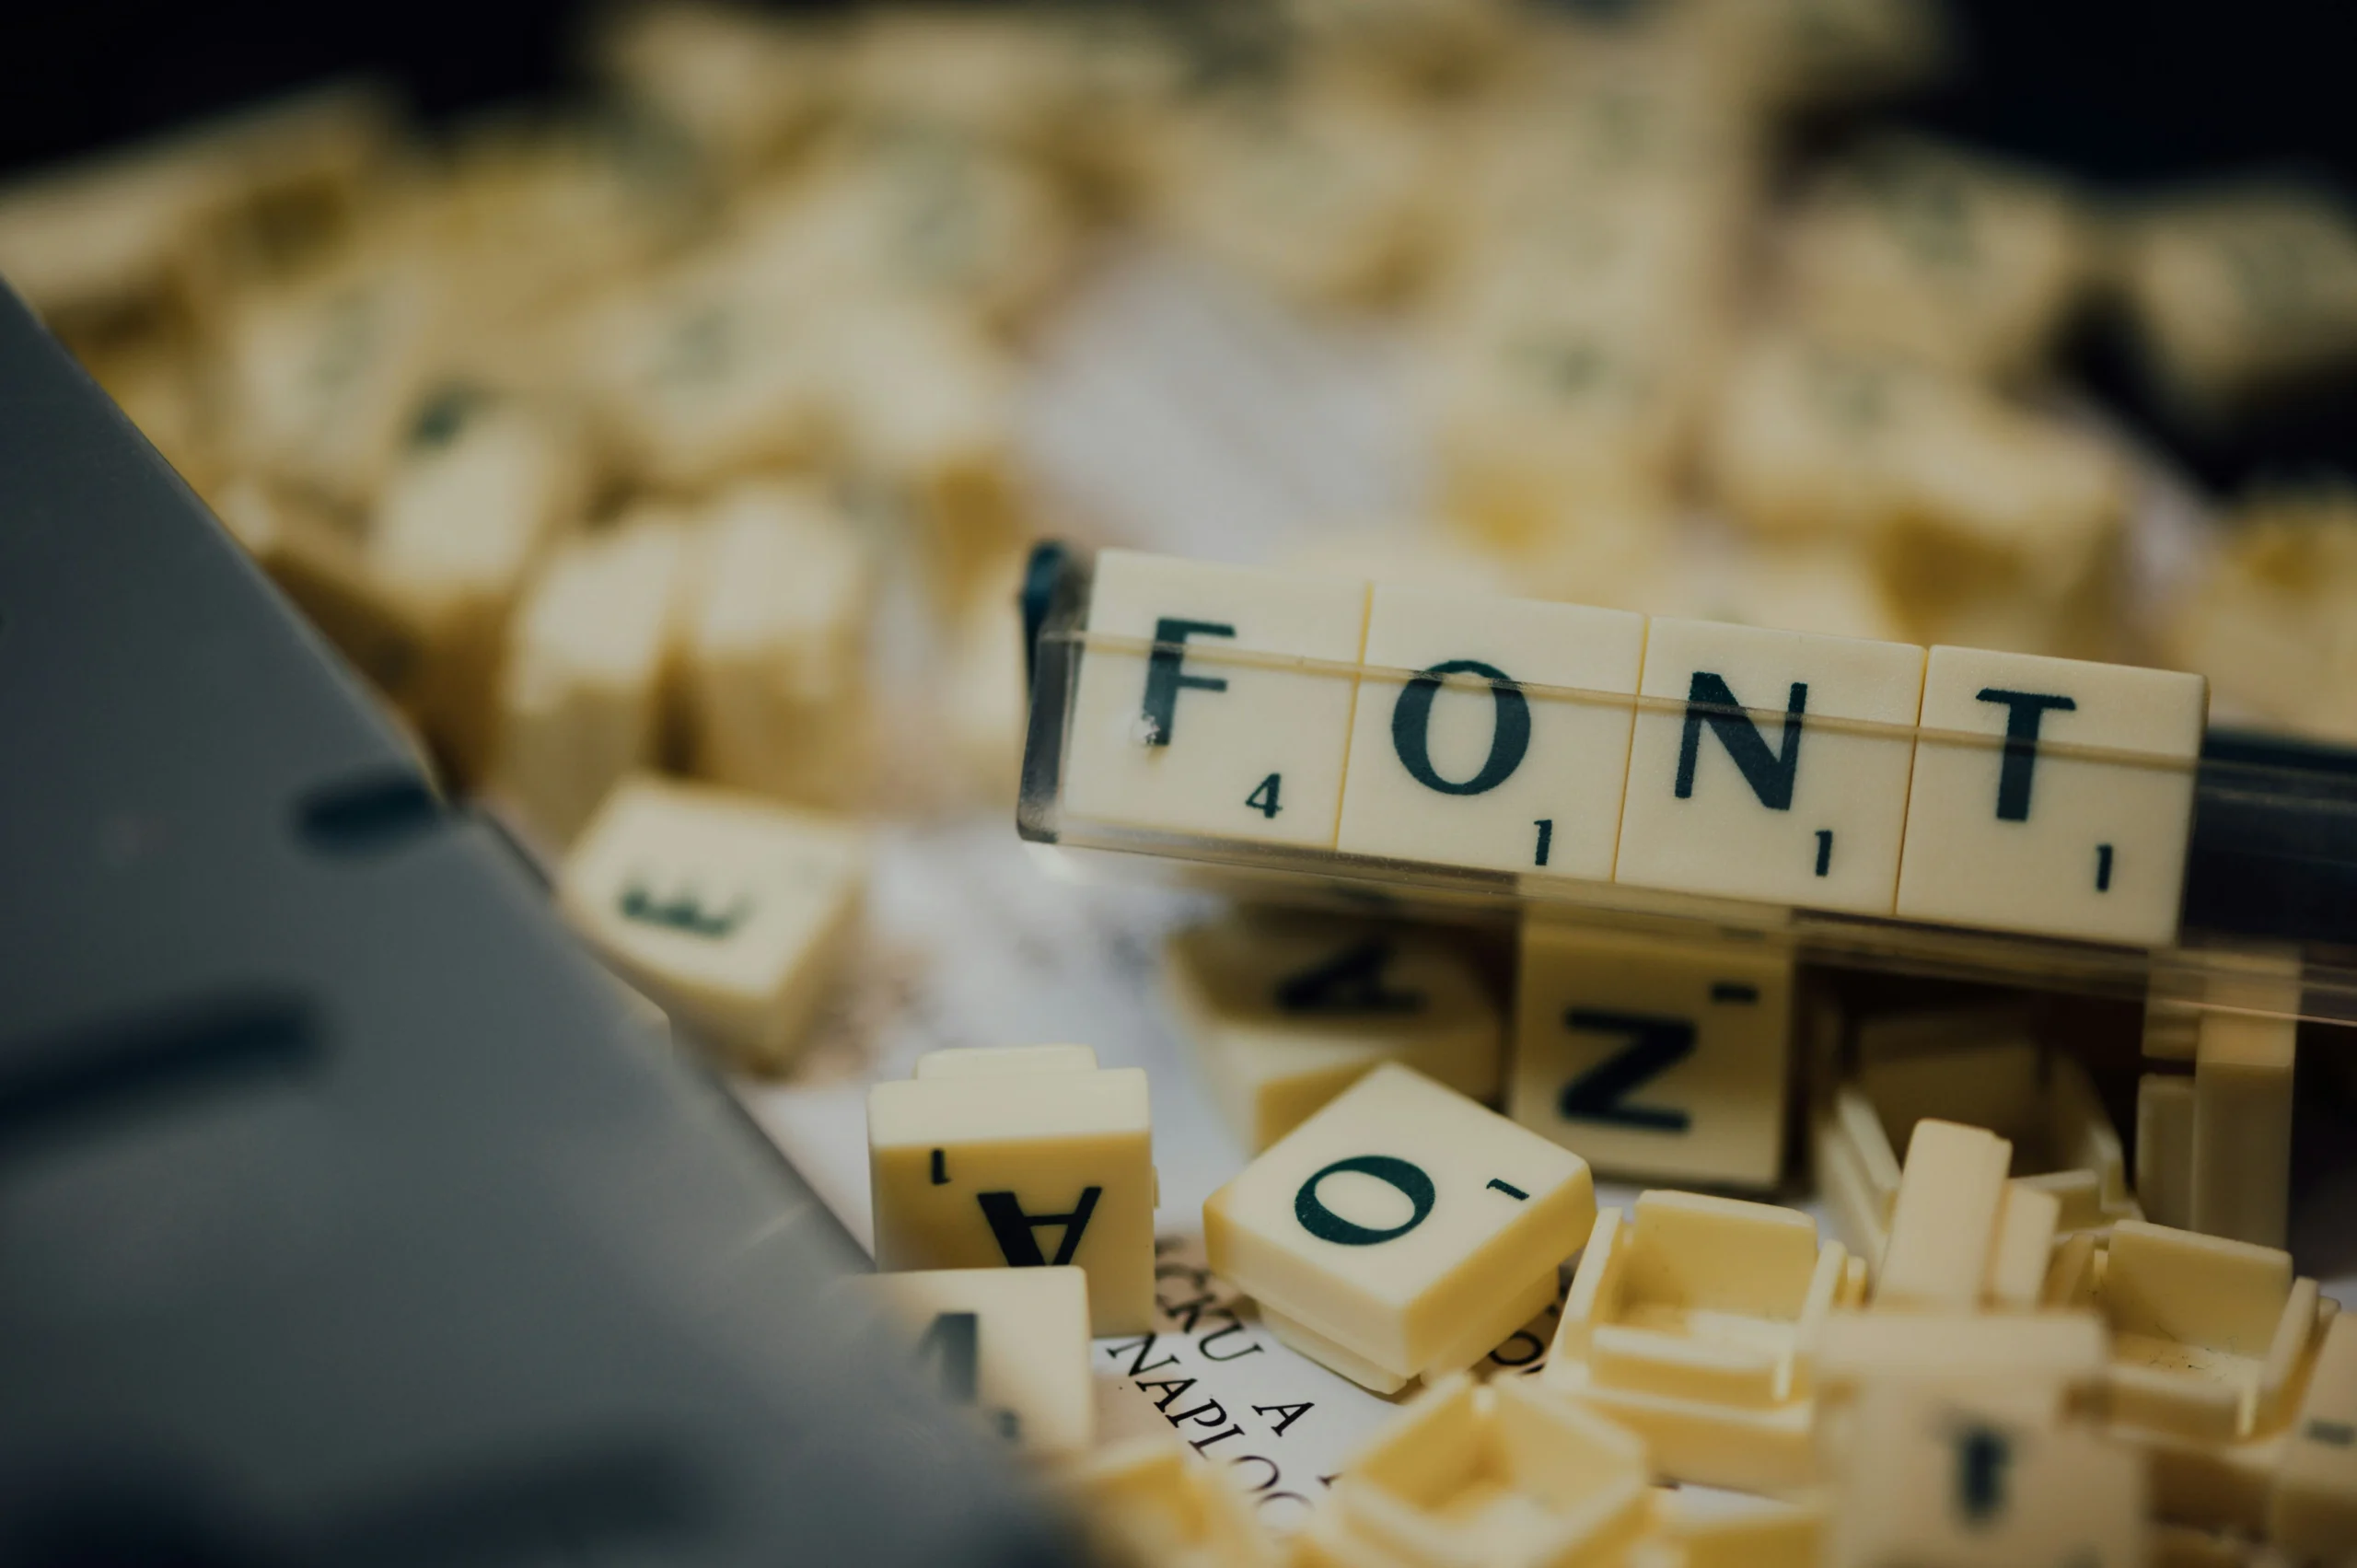 Letters on yellow blocks spelling out "font".